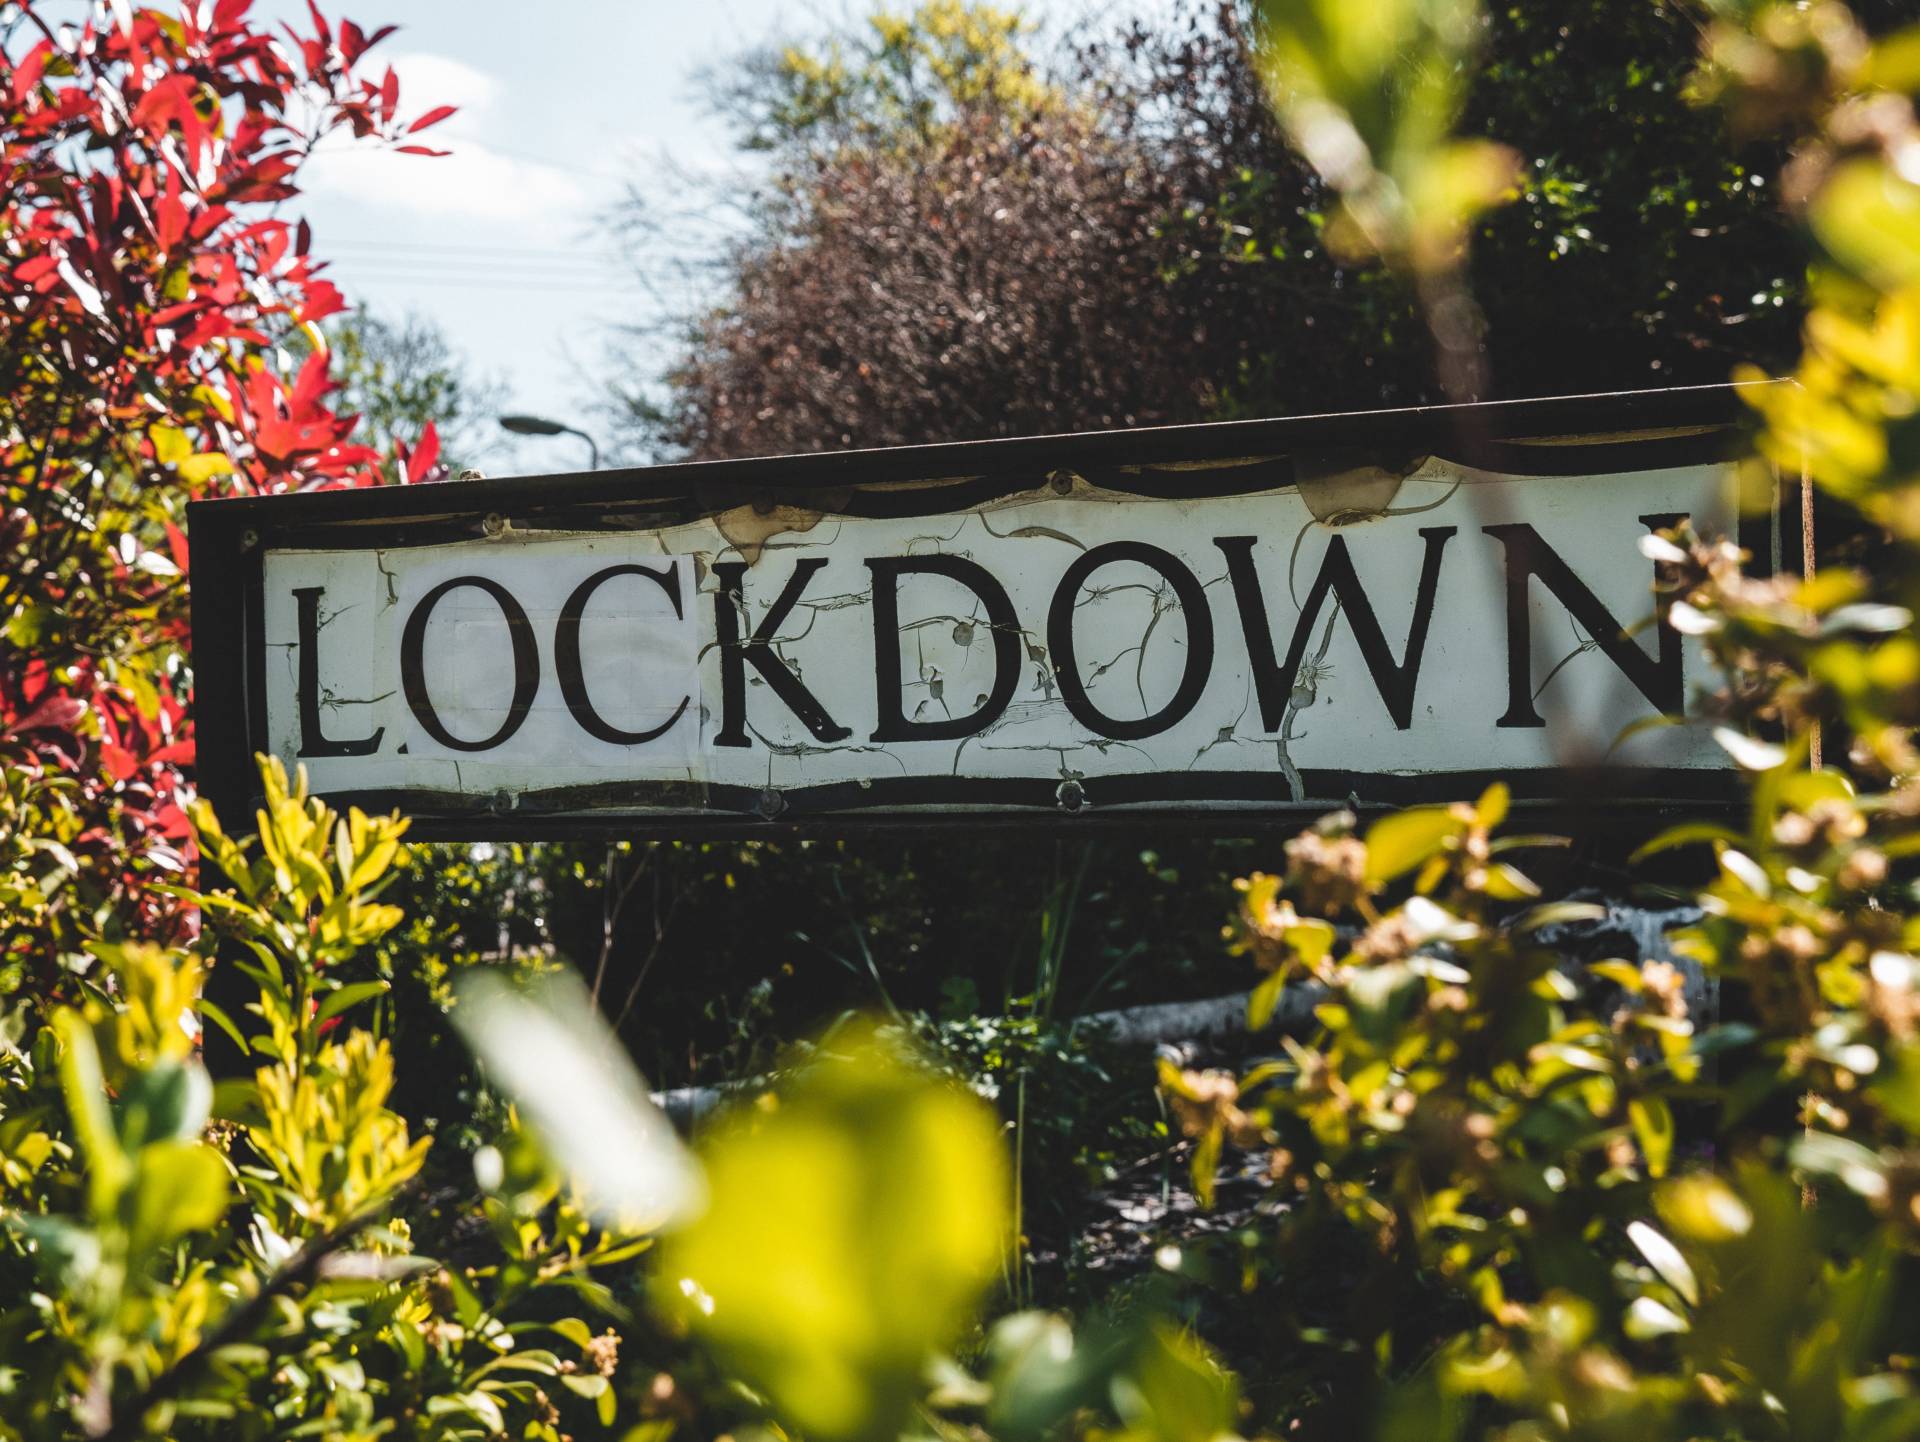 street sign with Lockdown surrounded by bushes